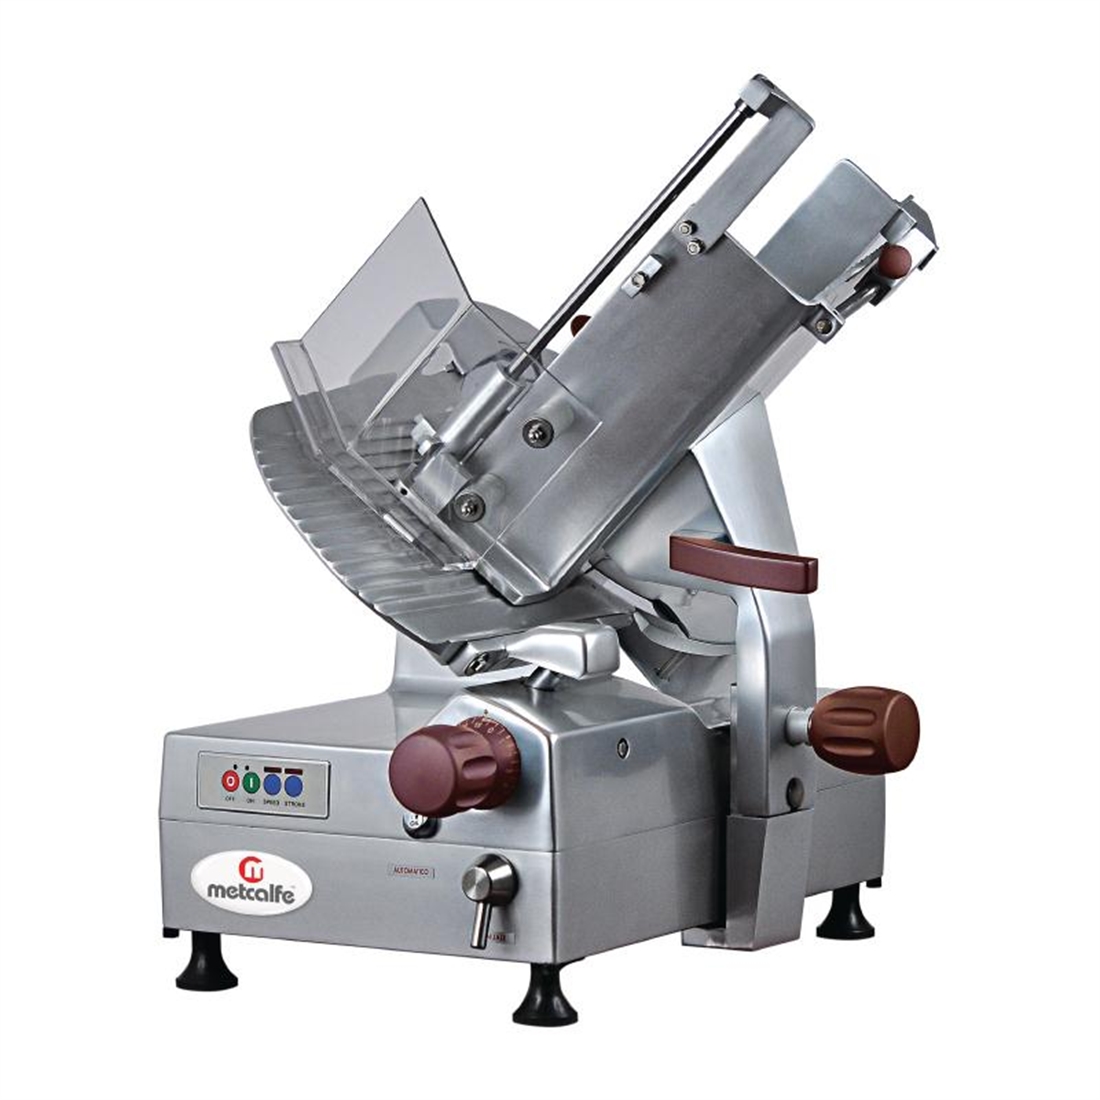 Metcalfe Automatic Gravity Feed Slicer NS300A